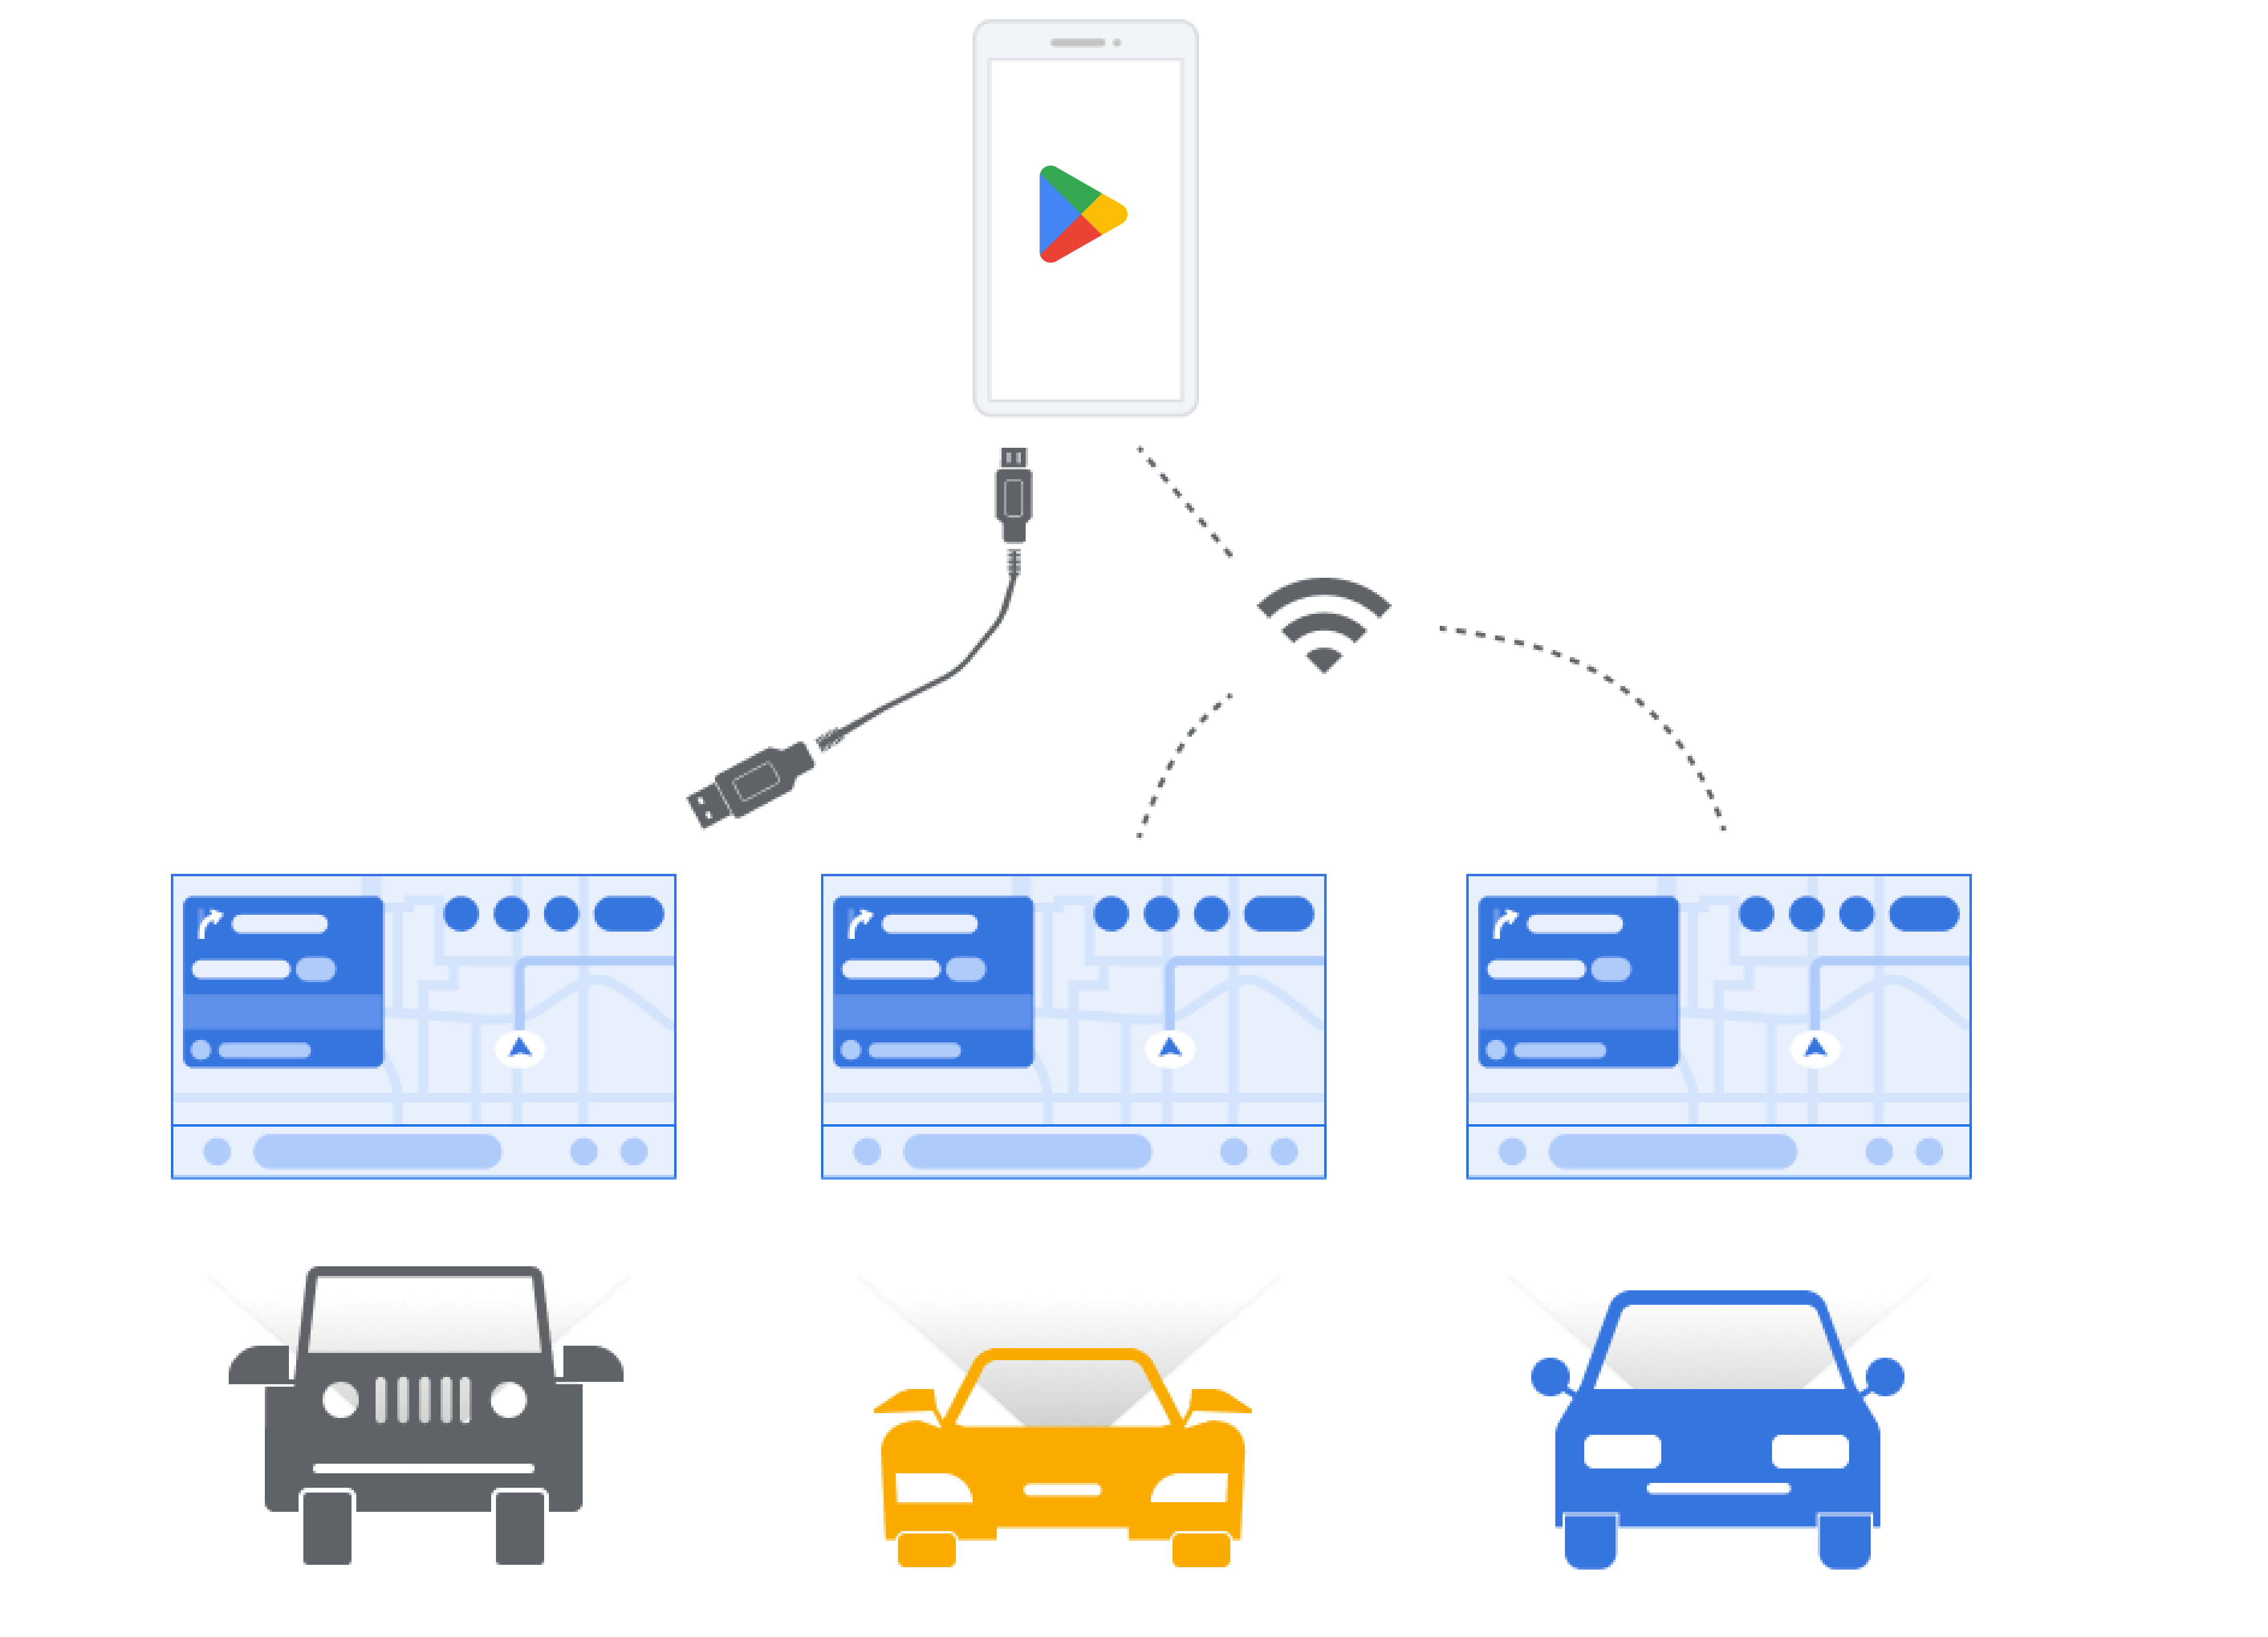 Diagram showing phones connected to cars via USB cable and wireless